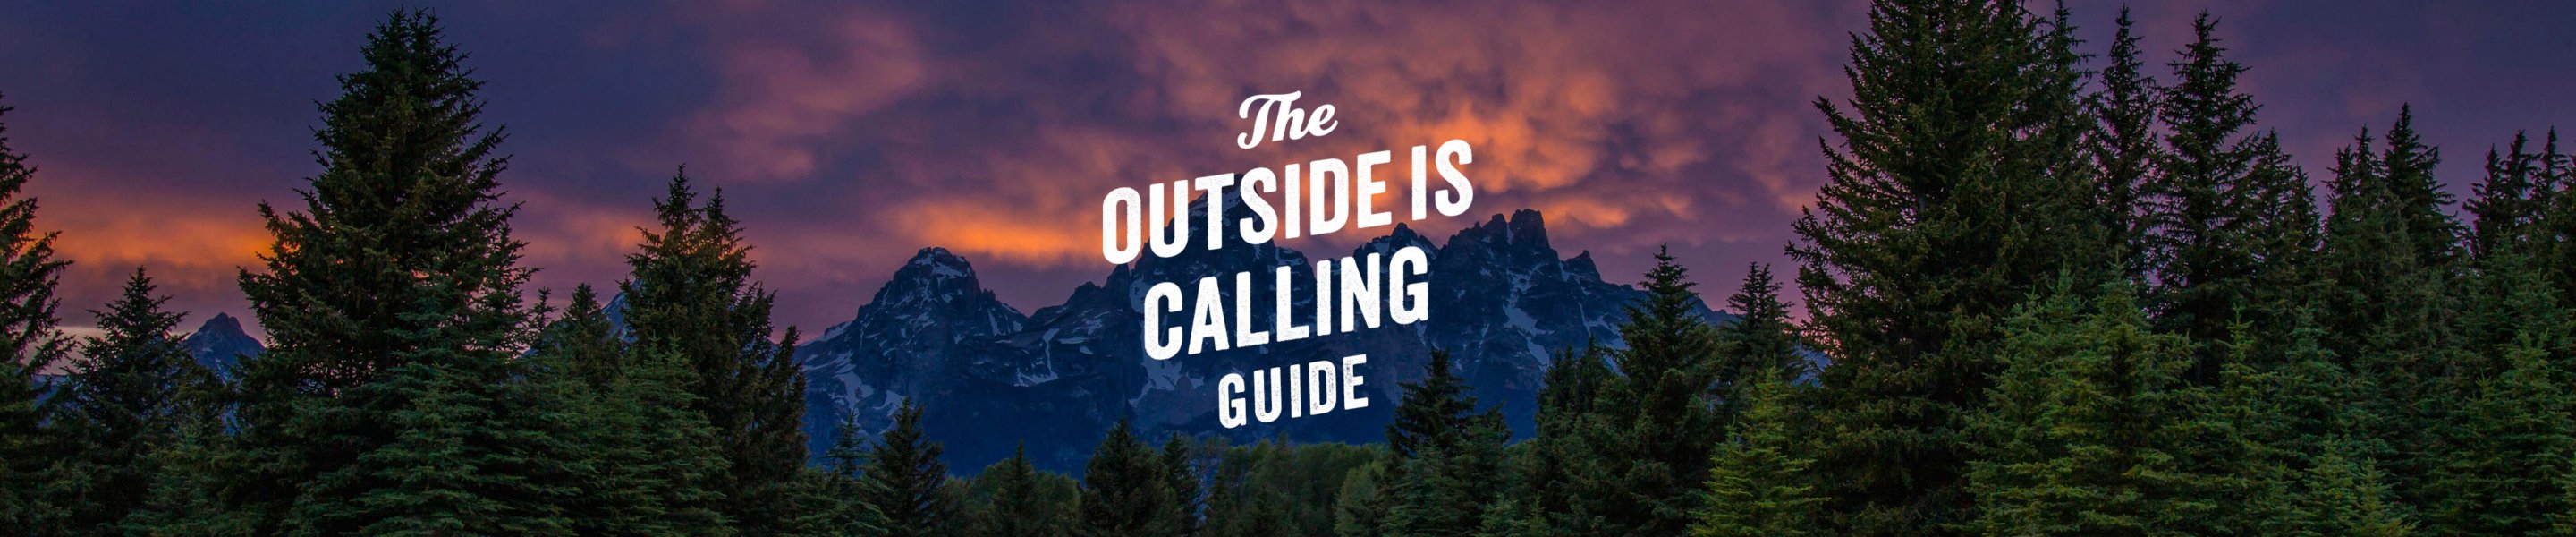 the outside is calling guide